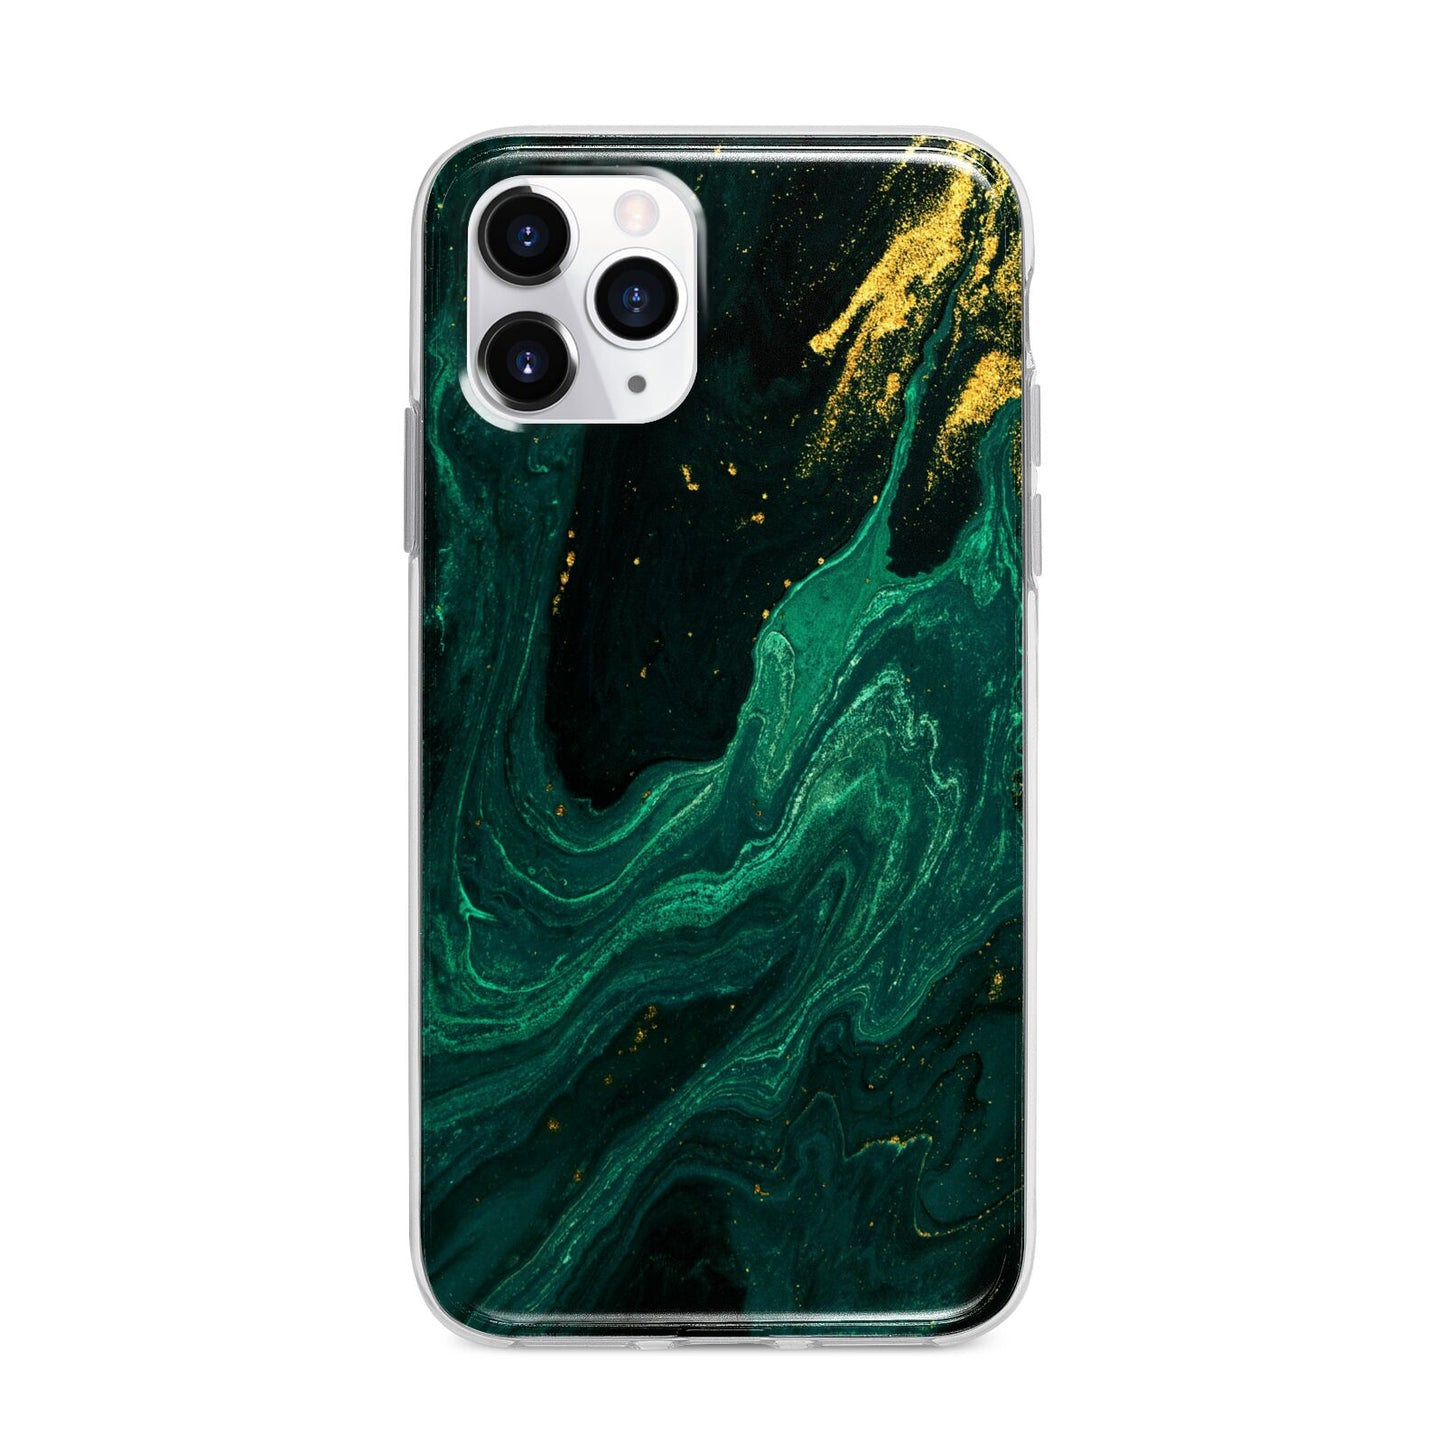 Emerald Green Apple iPhone 11 Pro Max in Silver with Bumper Case